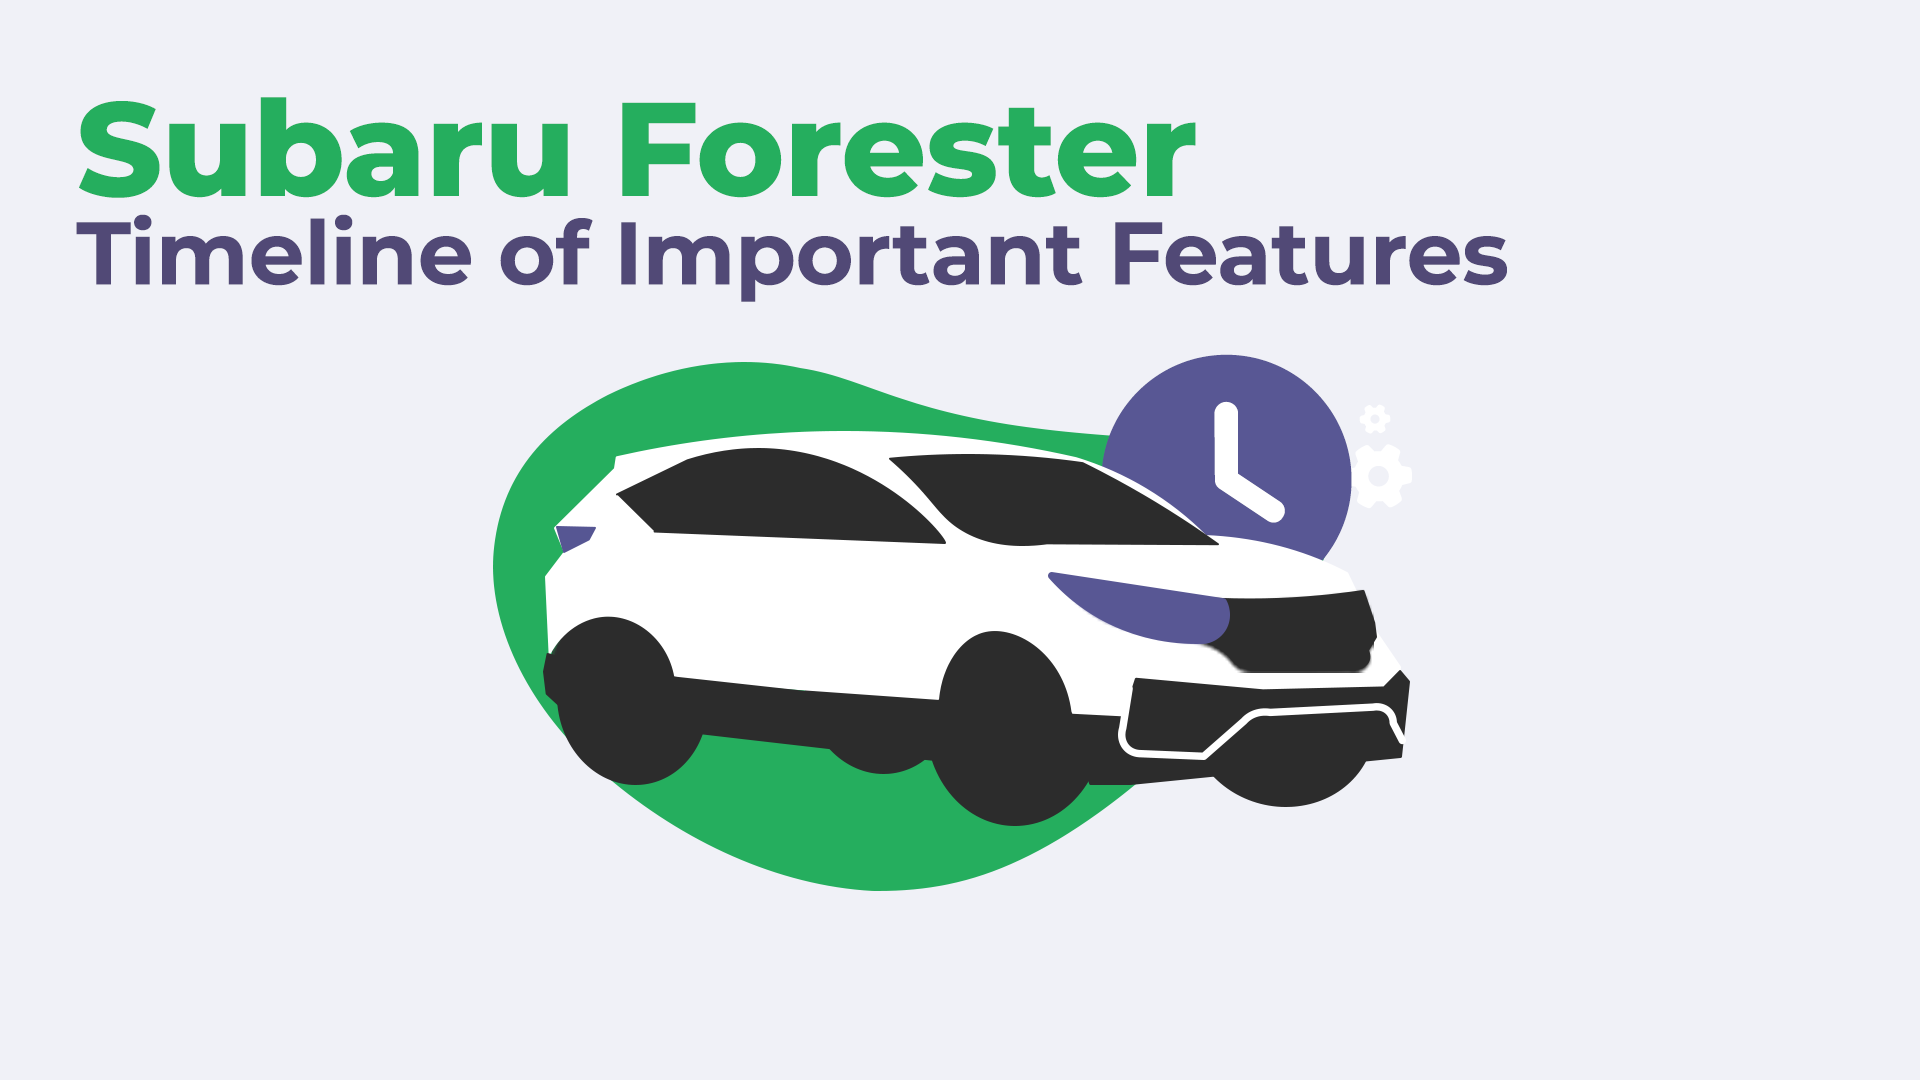 Subaru Forester Timeline of Important Features